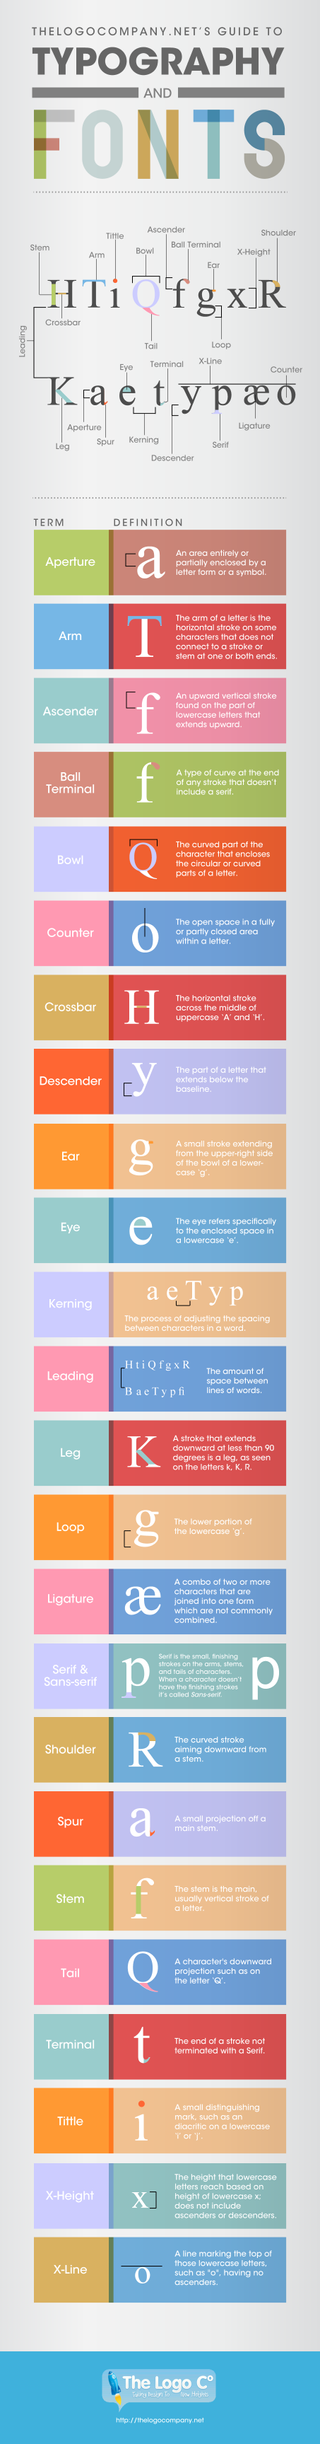 How many of these terms are you familiar with?